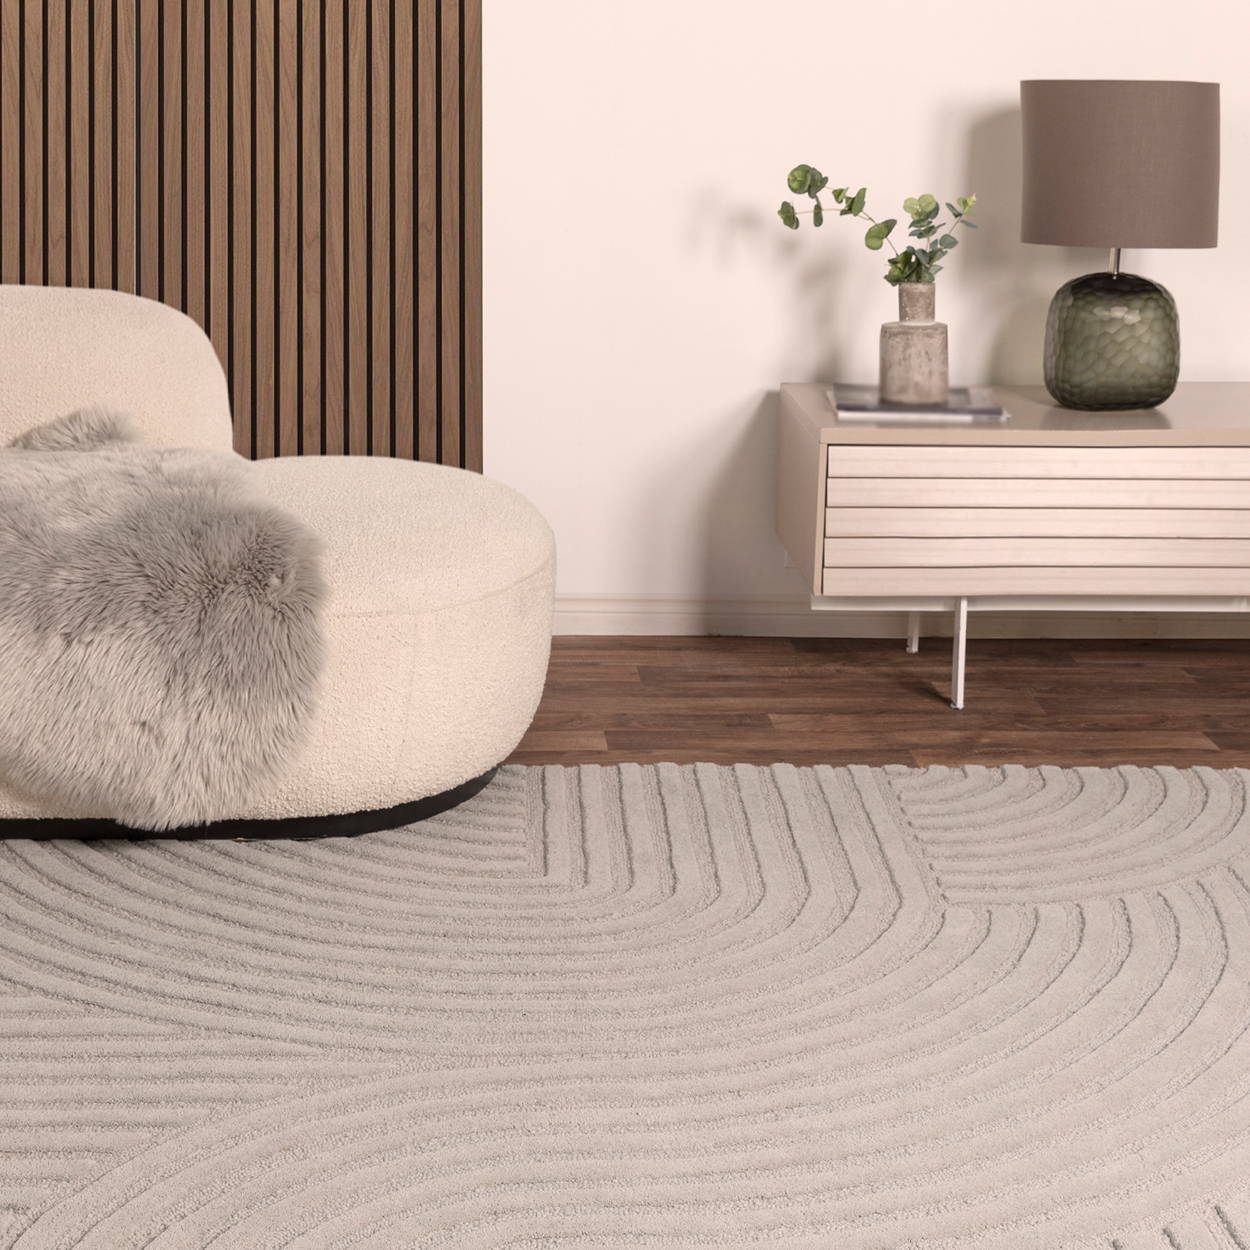 Hague Rugs Comes In Different Colours & Sizes That You can Choose From